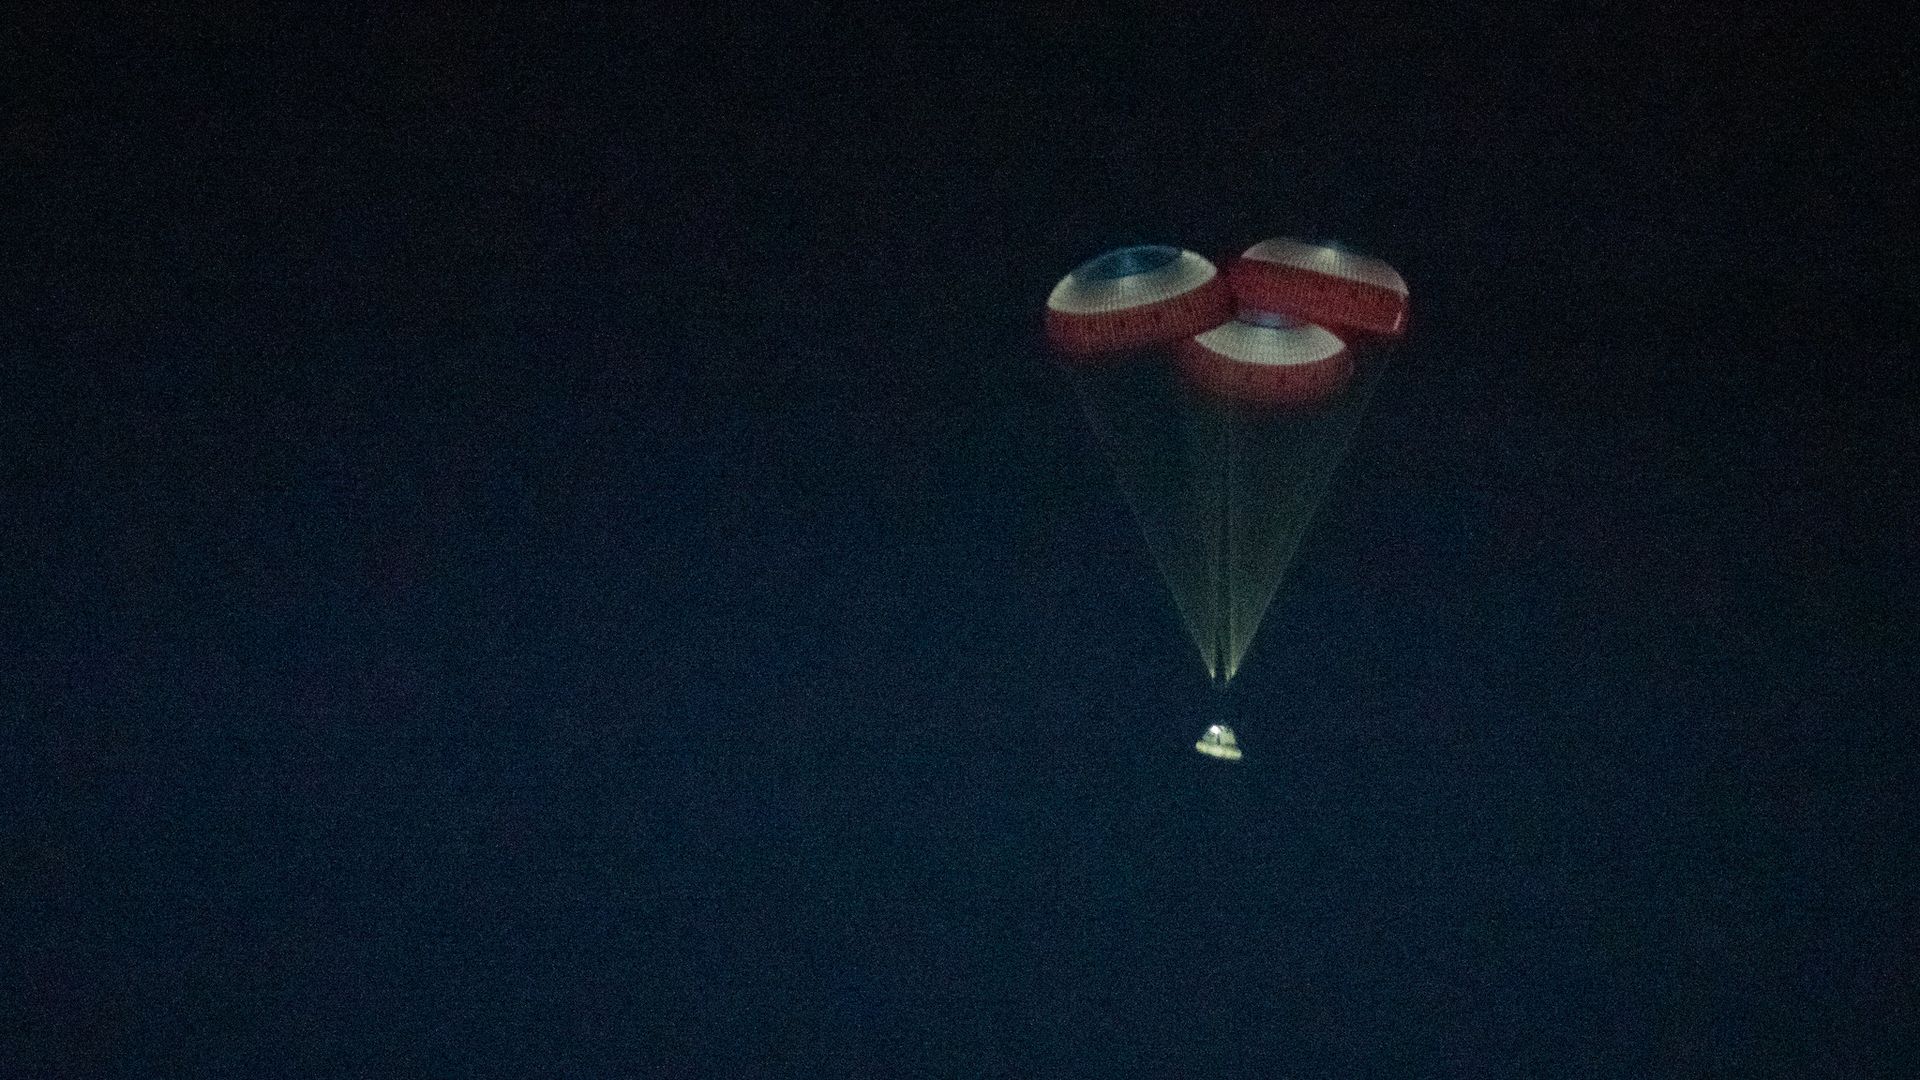 Boeing's Starliner capsule coming back in for a landing under three red, white and blue parachutes in the dark.